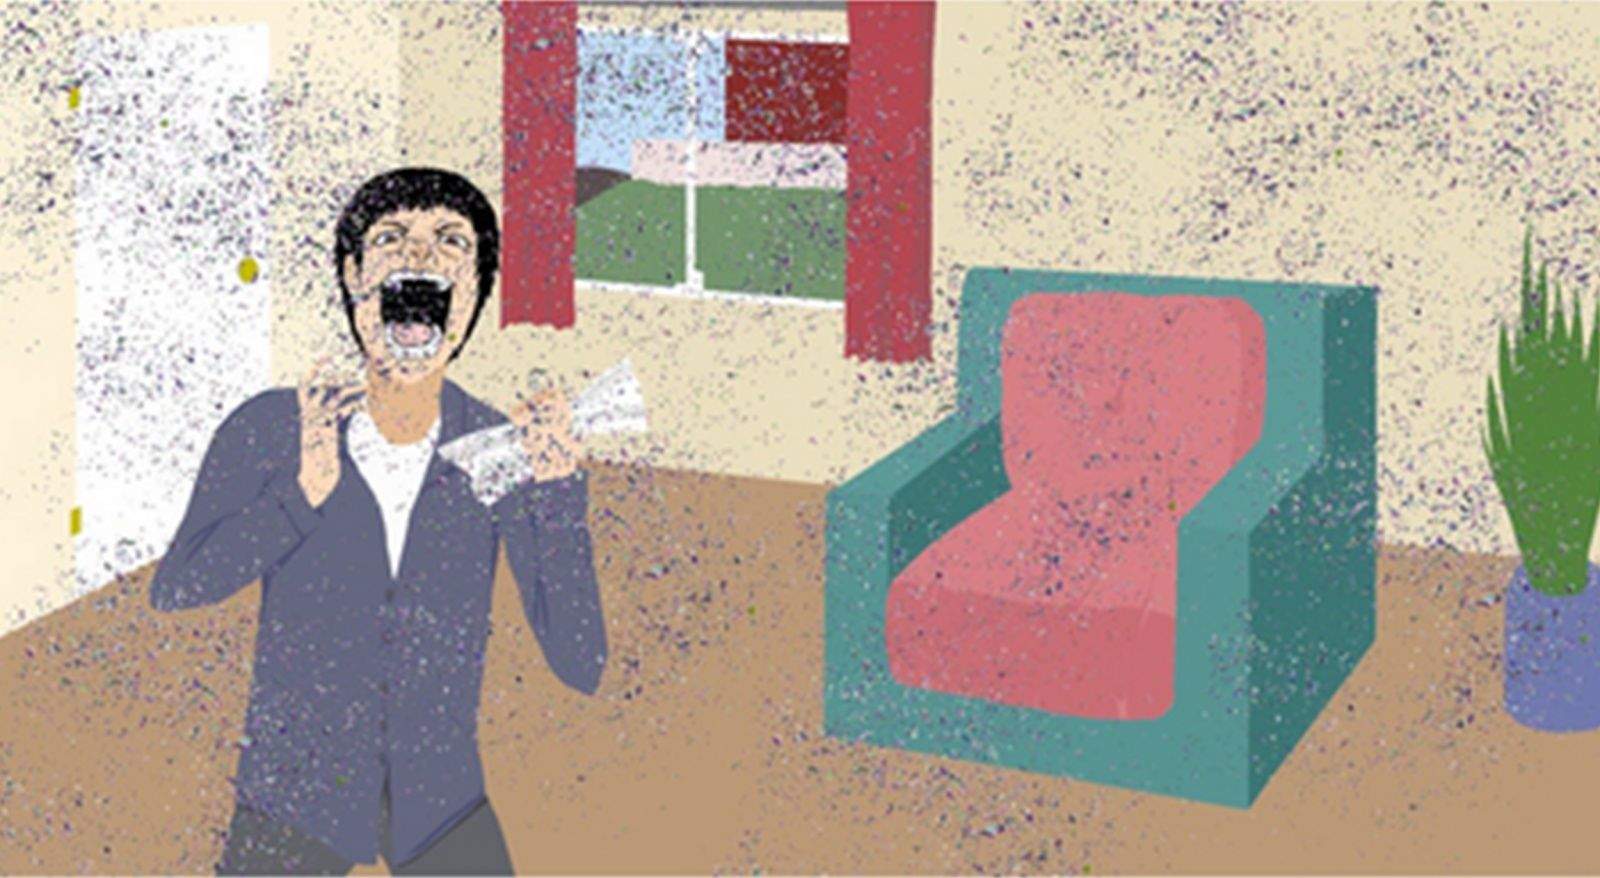 An artist rendering shows the reaction of a recipient of a glitter bomb. Illustration: shipyourenemiesglitter.com